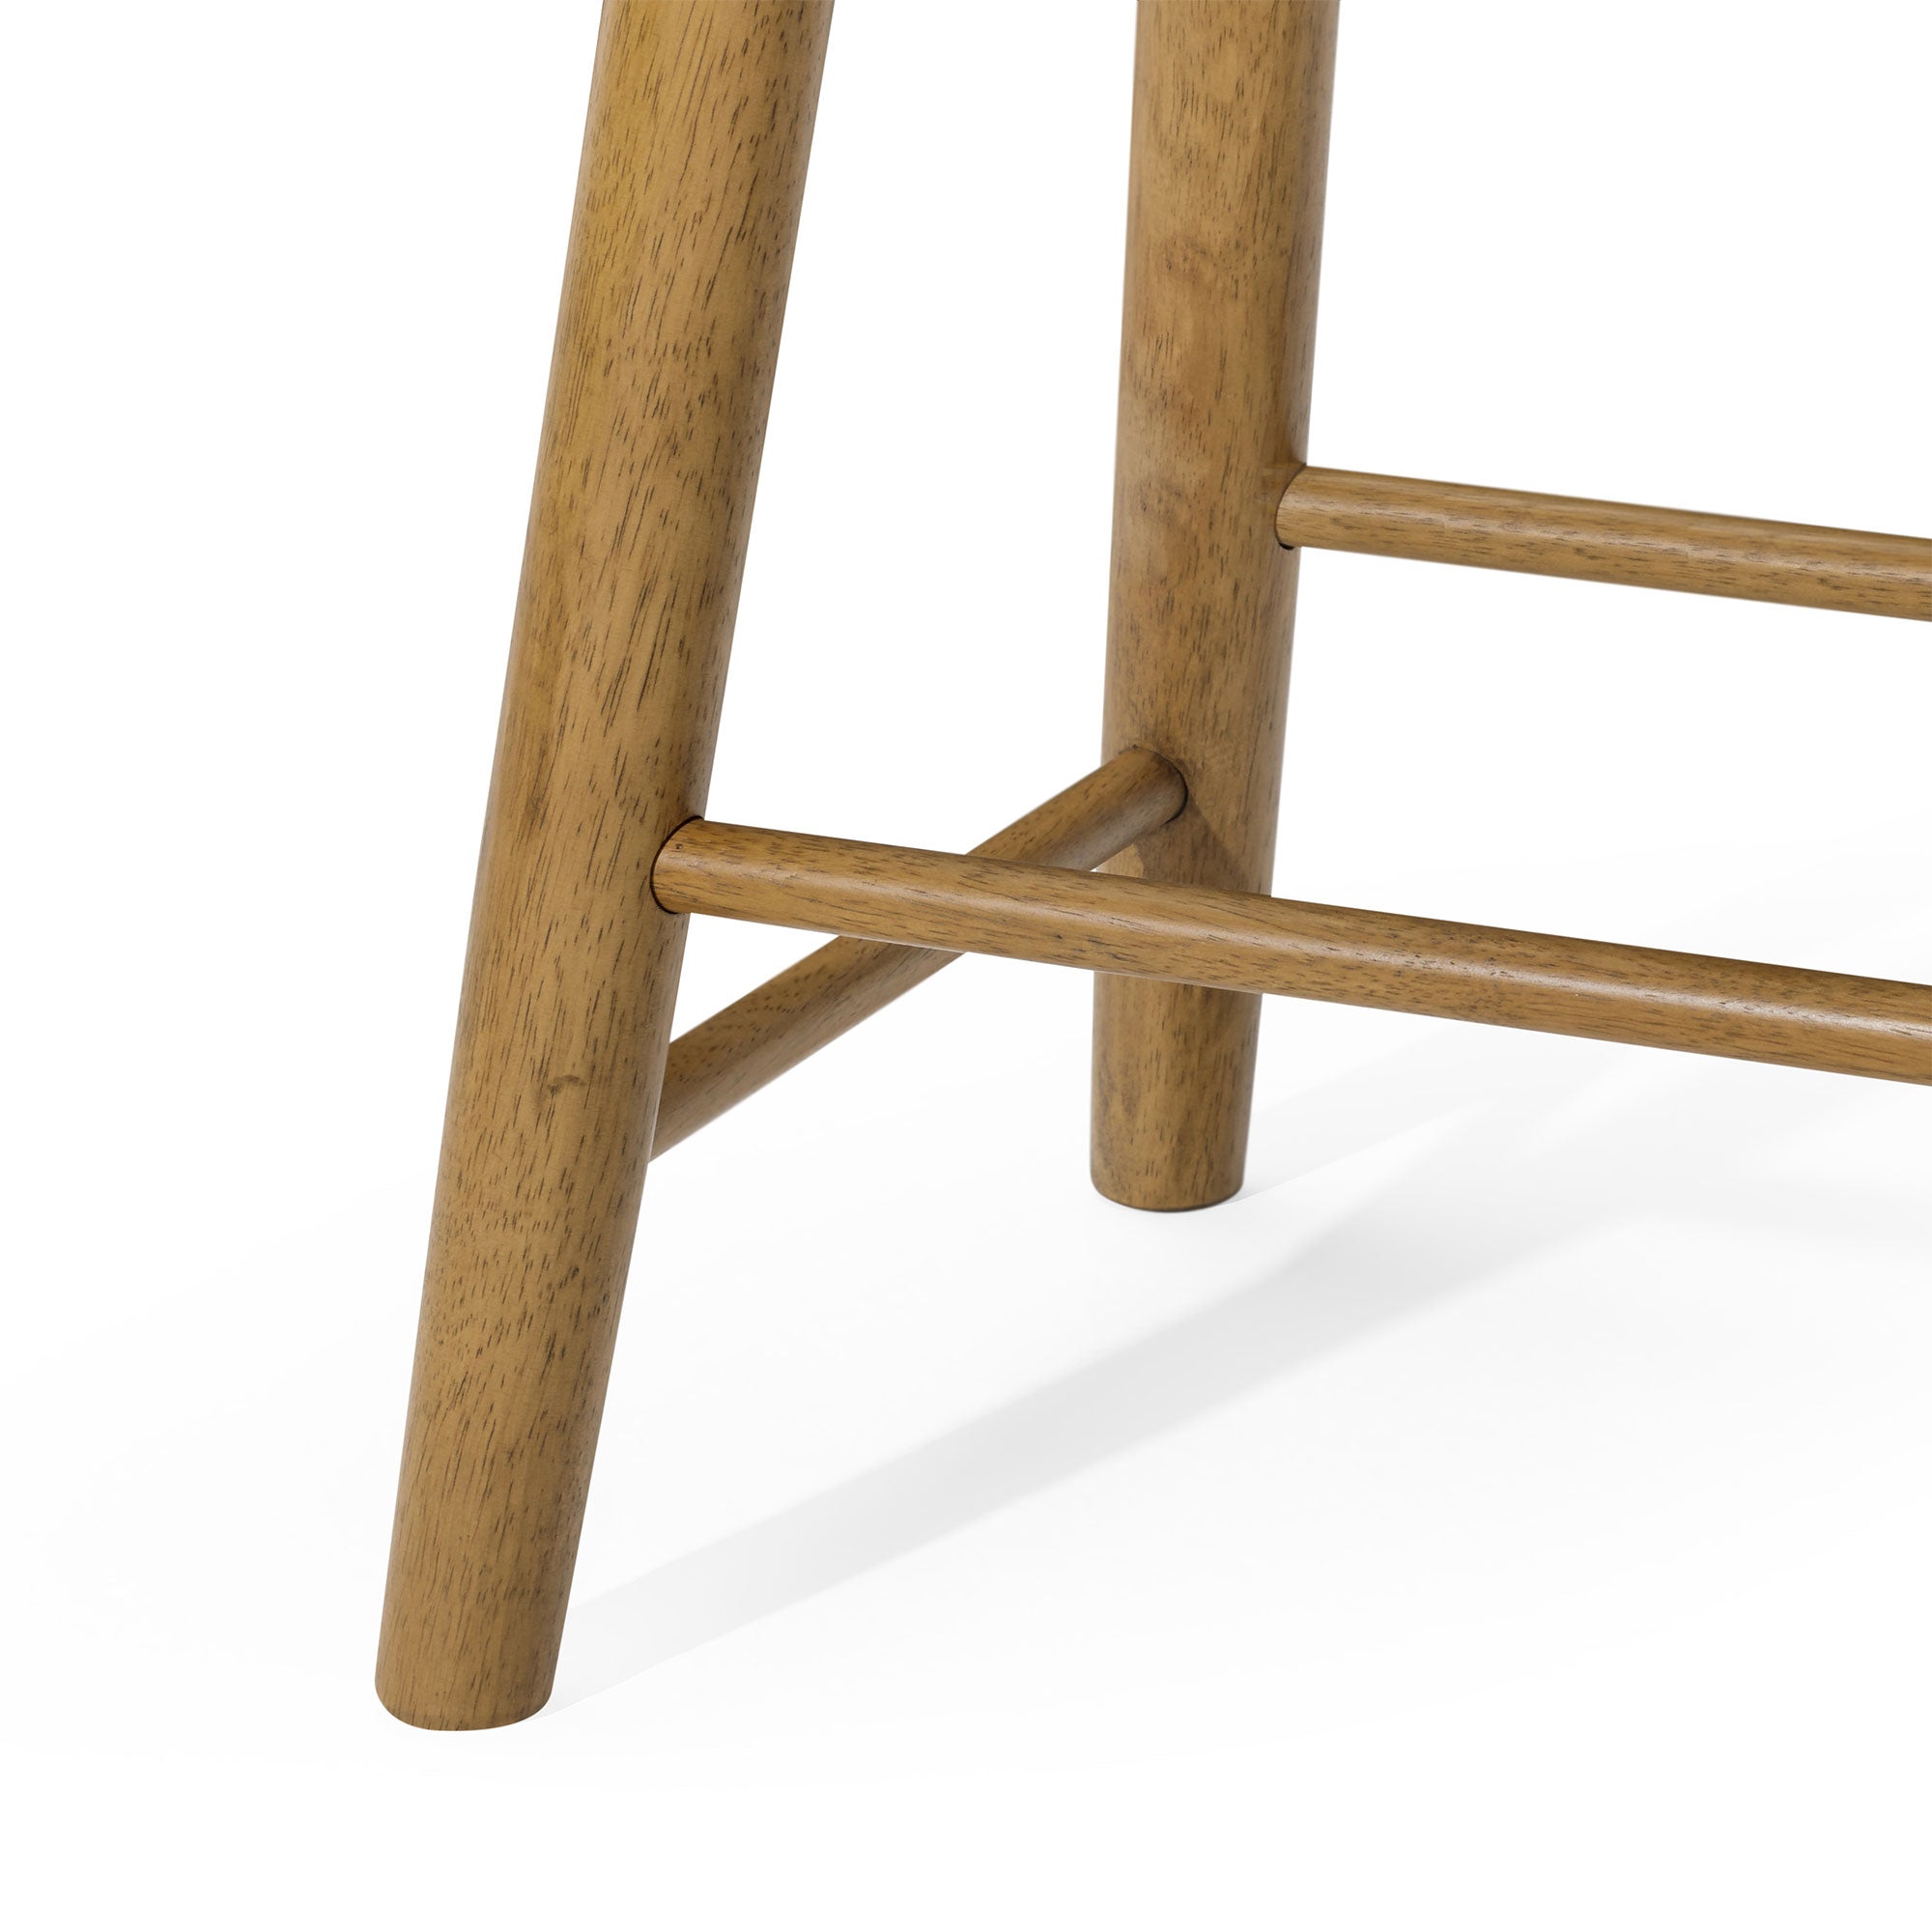 Luna Counter Stool in Rustic Natural Wood Finish in Stools by Maven Lane